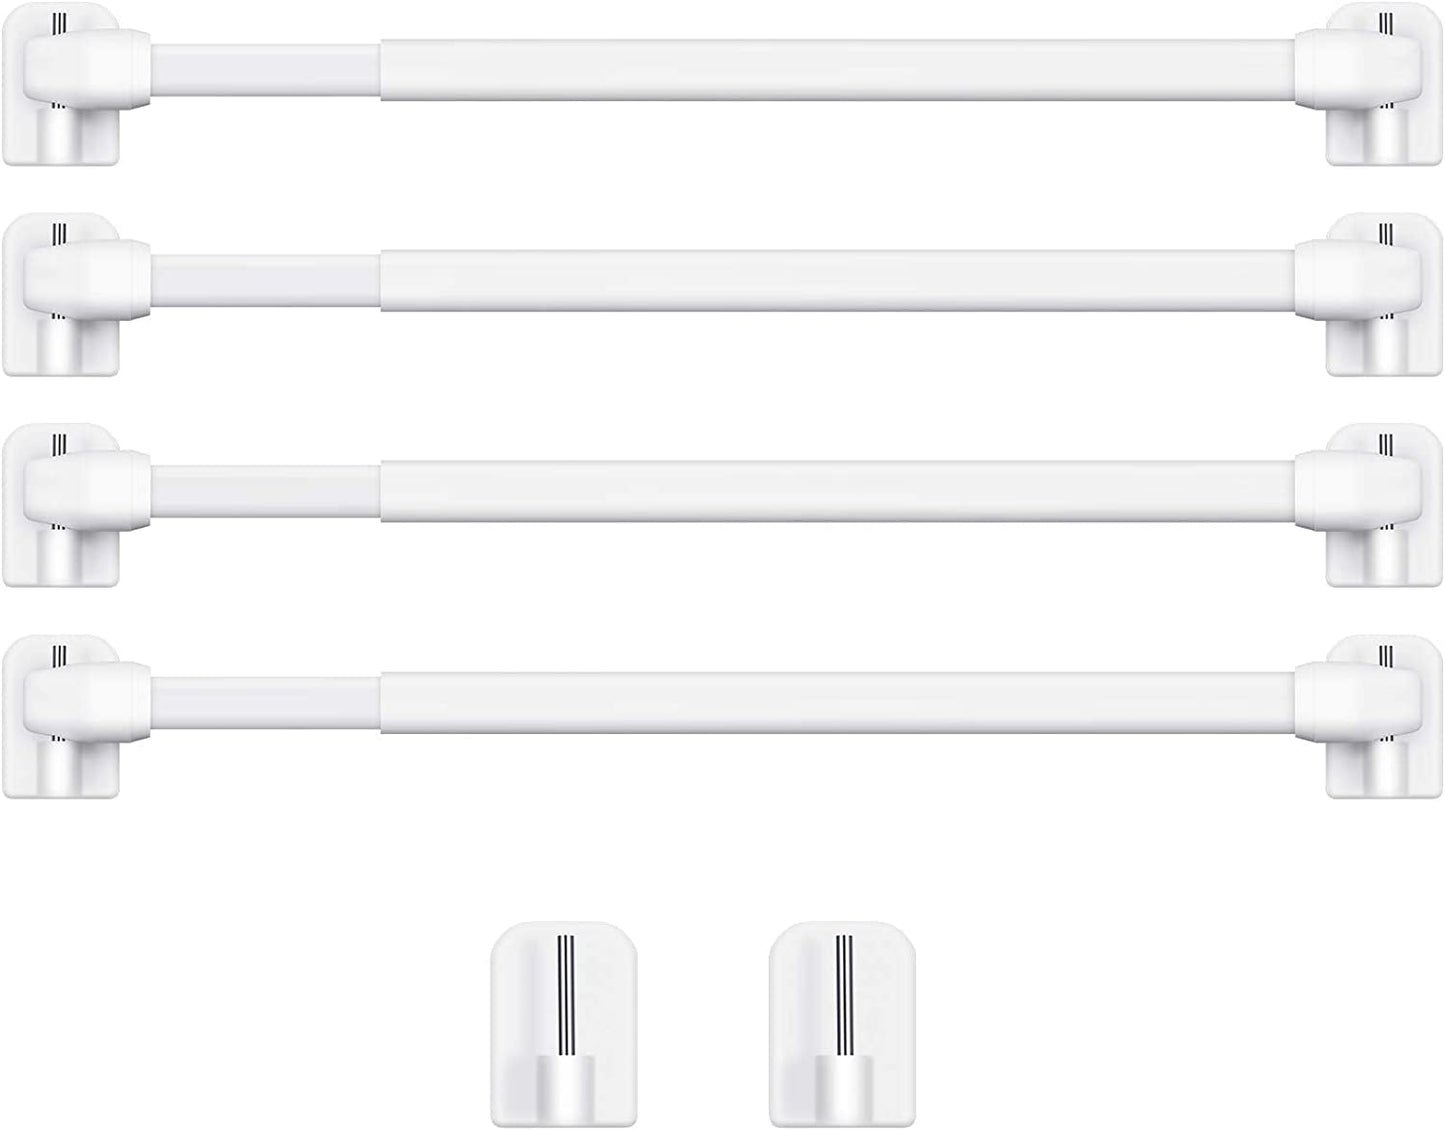 4 Pieces Extendable Curtain Rod Cupboard Bars Tensions Adjustable Plastic with 10 Self Adhesive Hooks for Home Bathroom Hotel Supply (15.7 to 27.5 Inch, White)